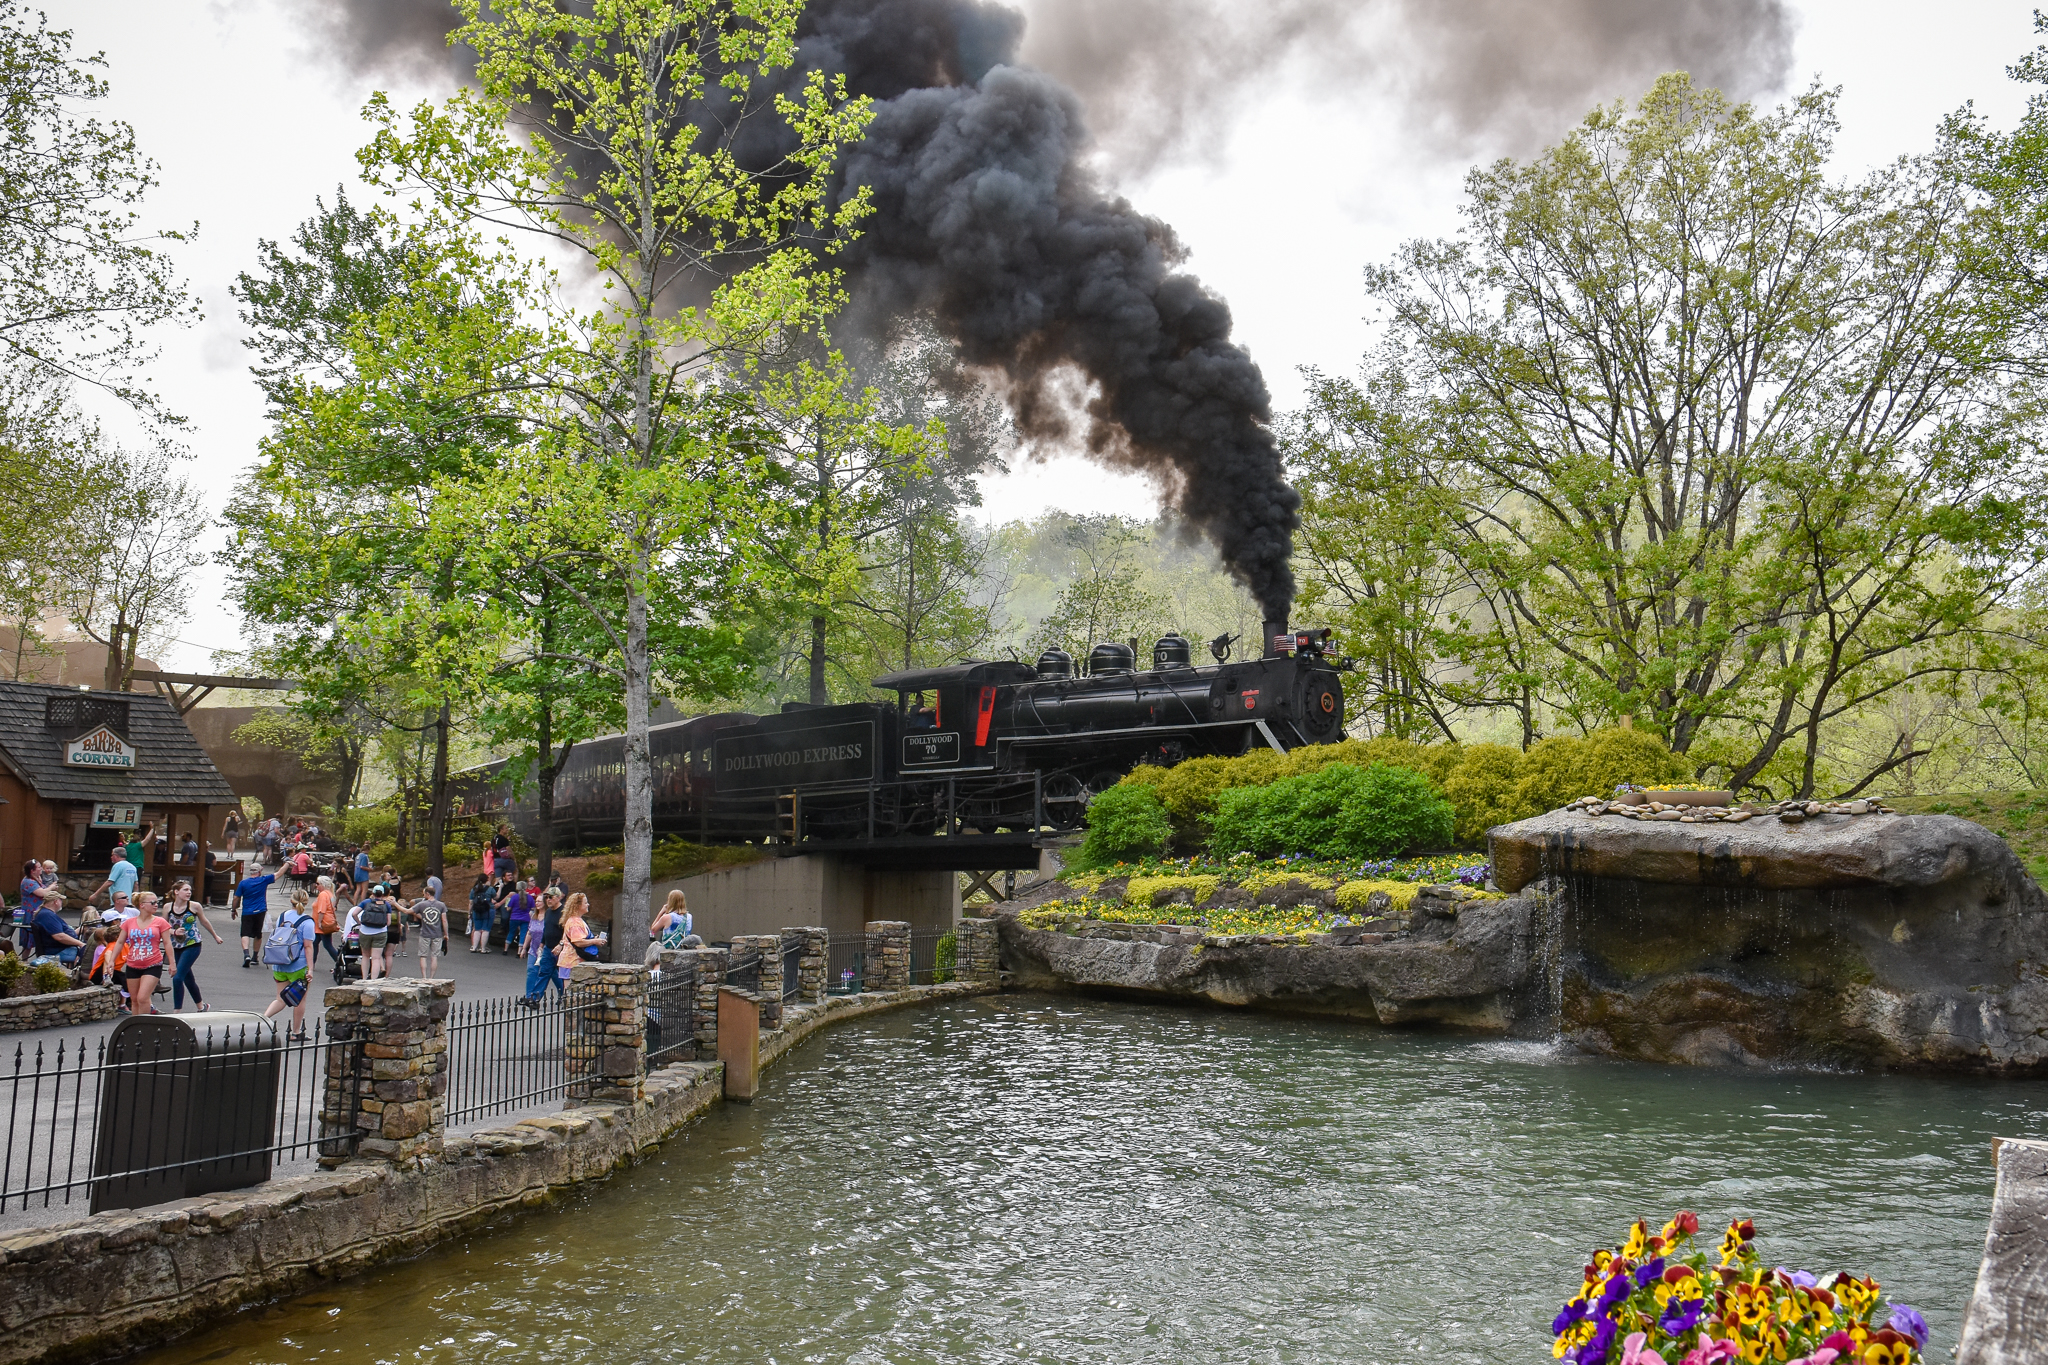 The Dollywood Express (big black train) running through Dollywood with billowing black smoke, amidst the green trees and flowers.